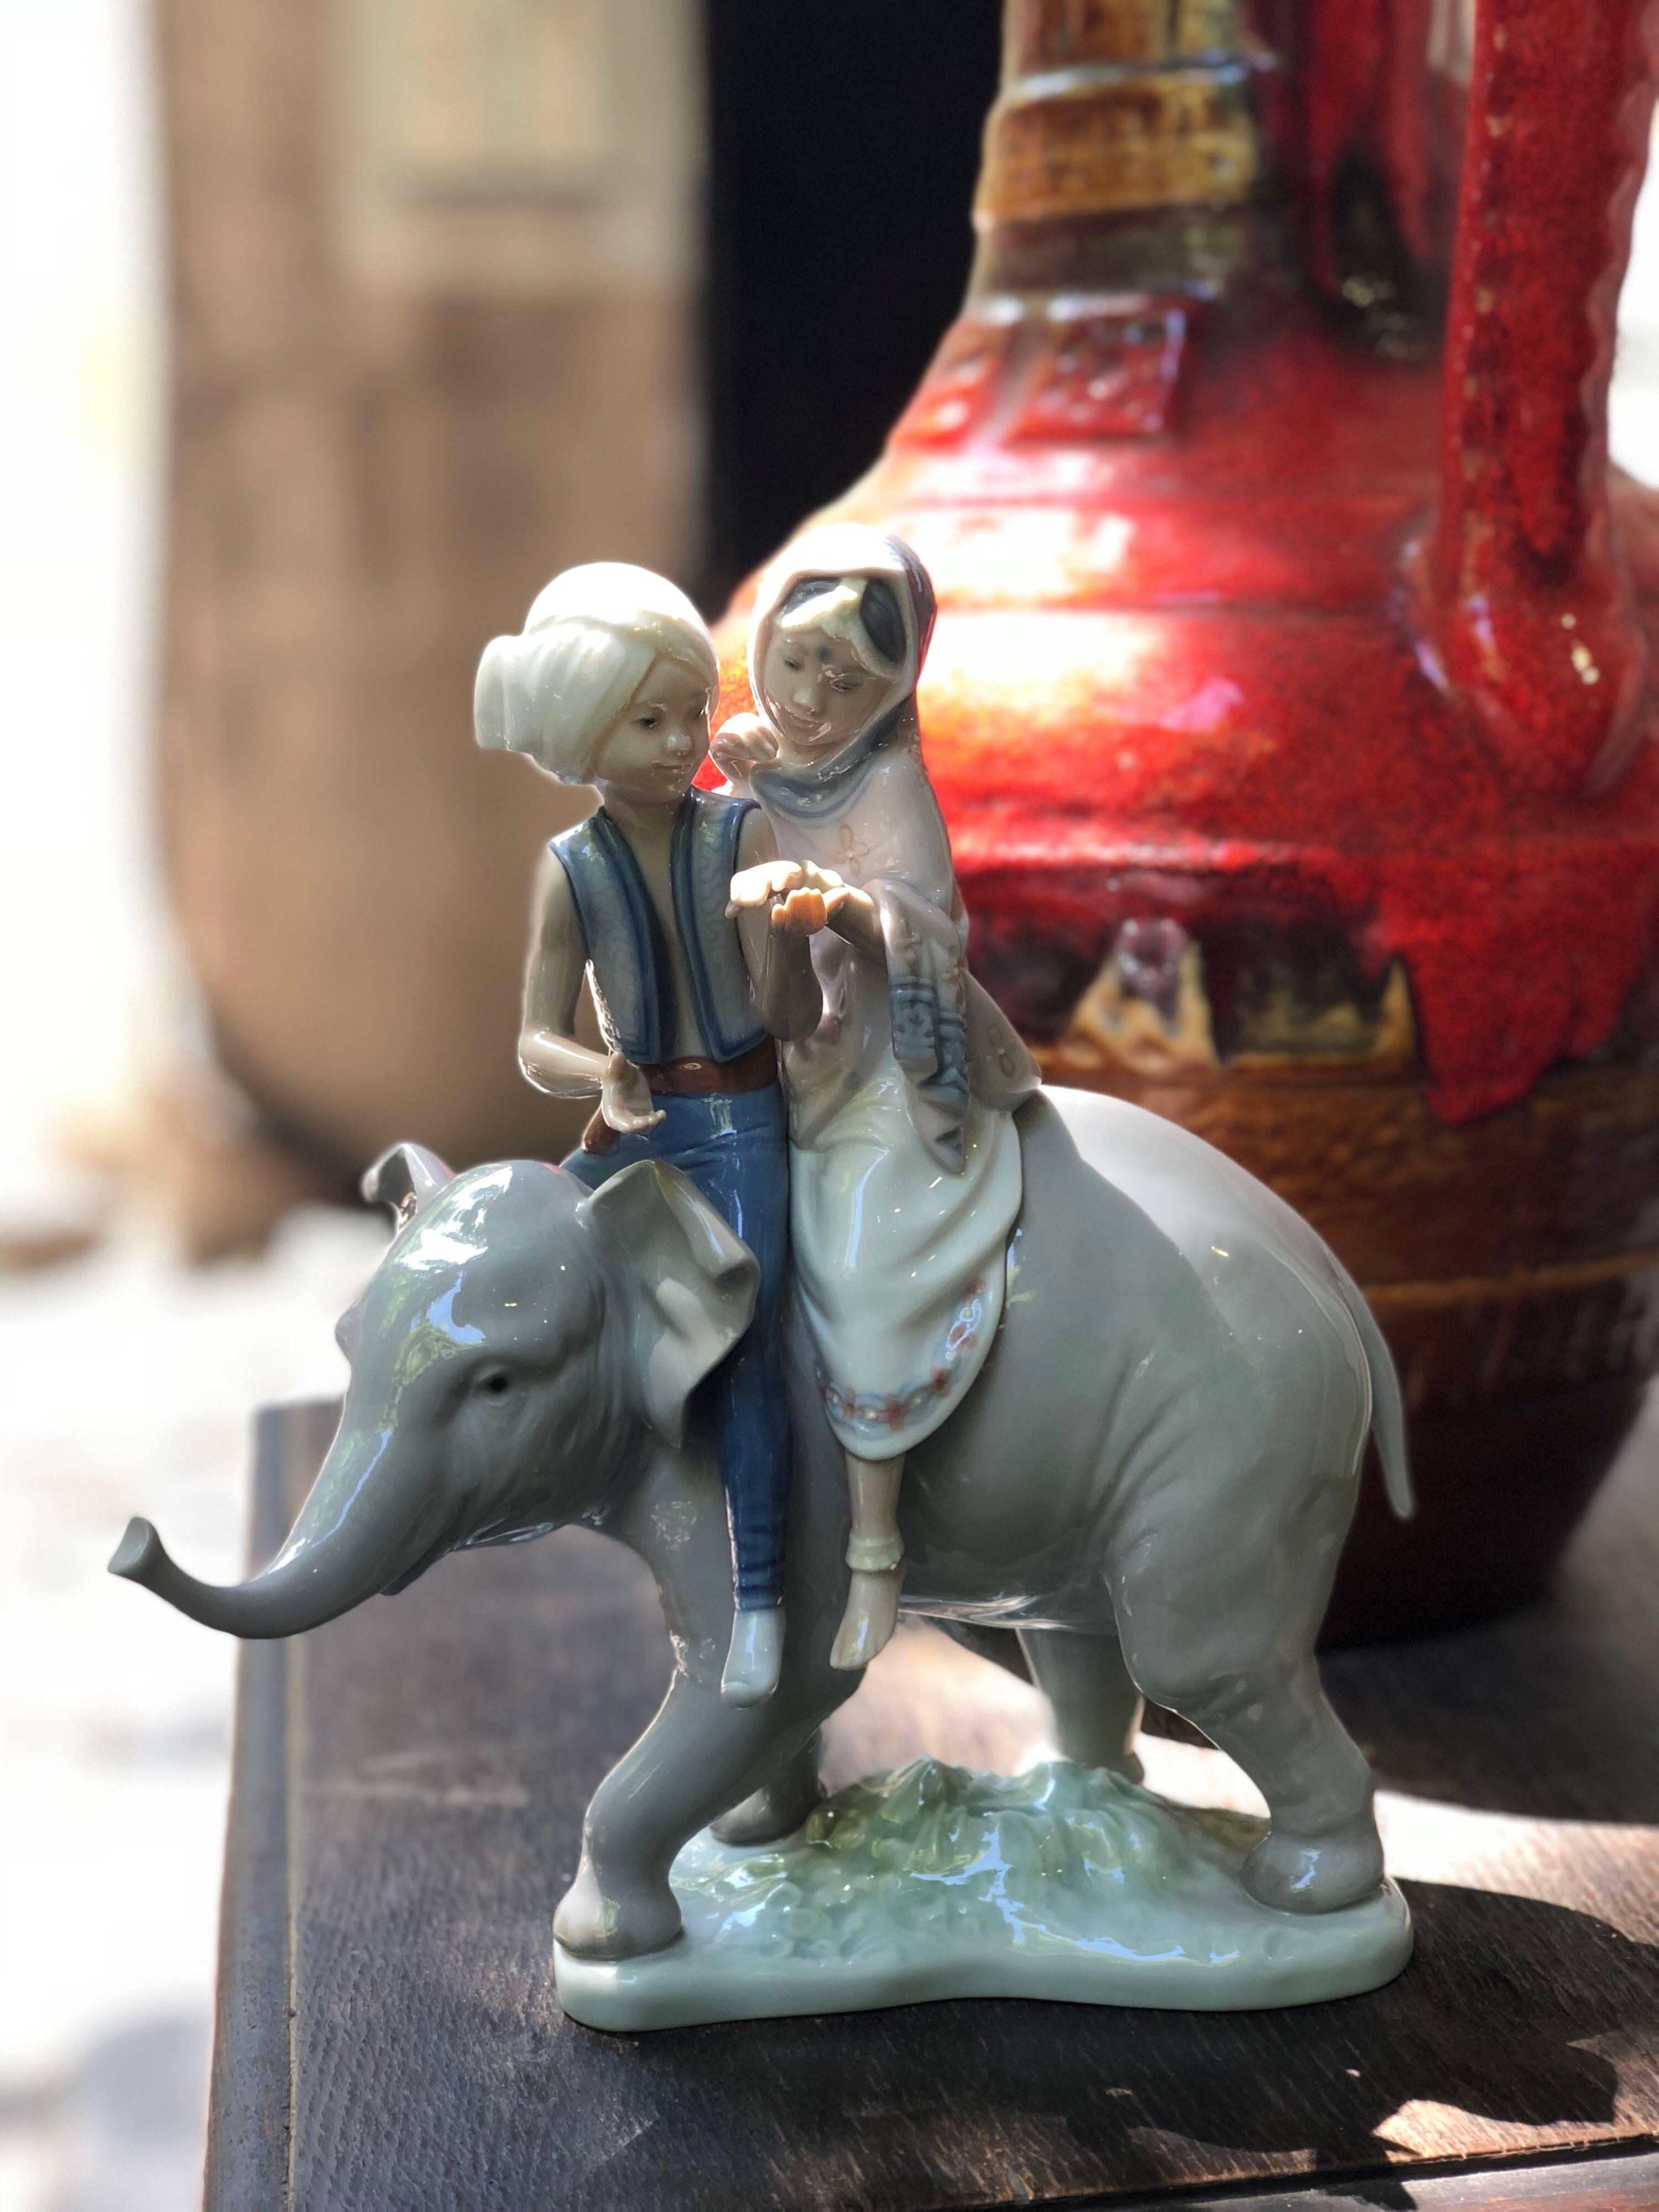 This Lladro piece is a porcelain figurine that depicts an young Indian elephant, upon which a pair of Hindu children sit. The glazed grey hues of the elephant's porcelain skin accentuates the intricate detailing and musculature of the largest land